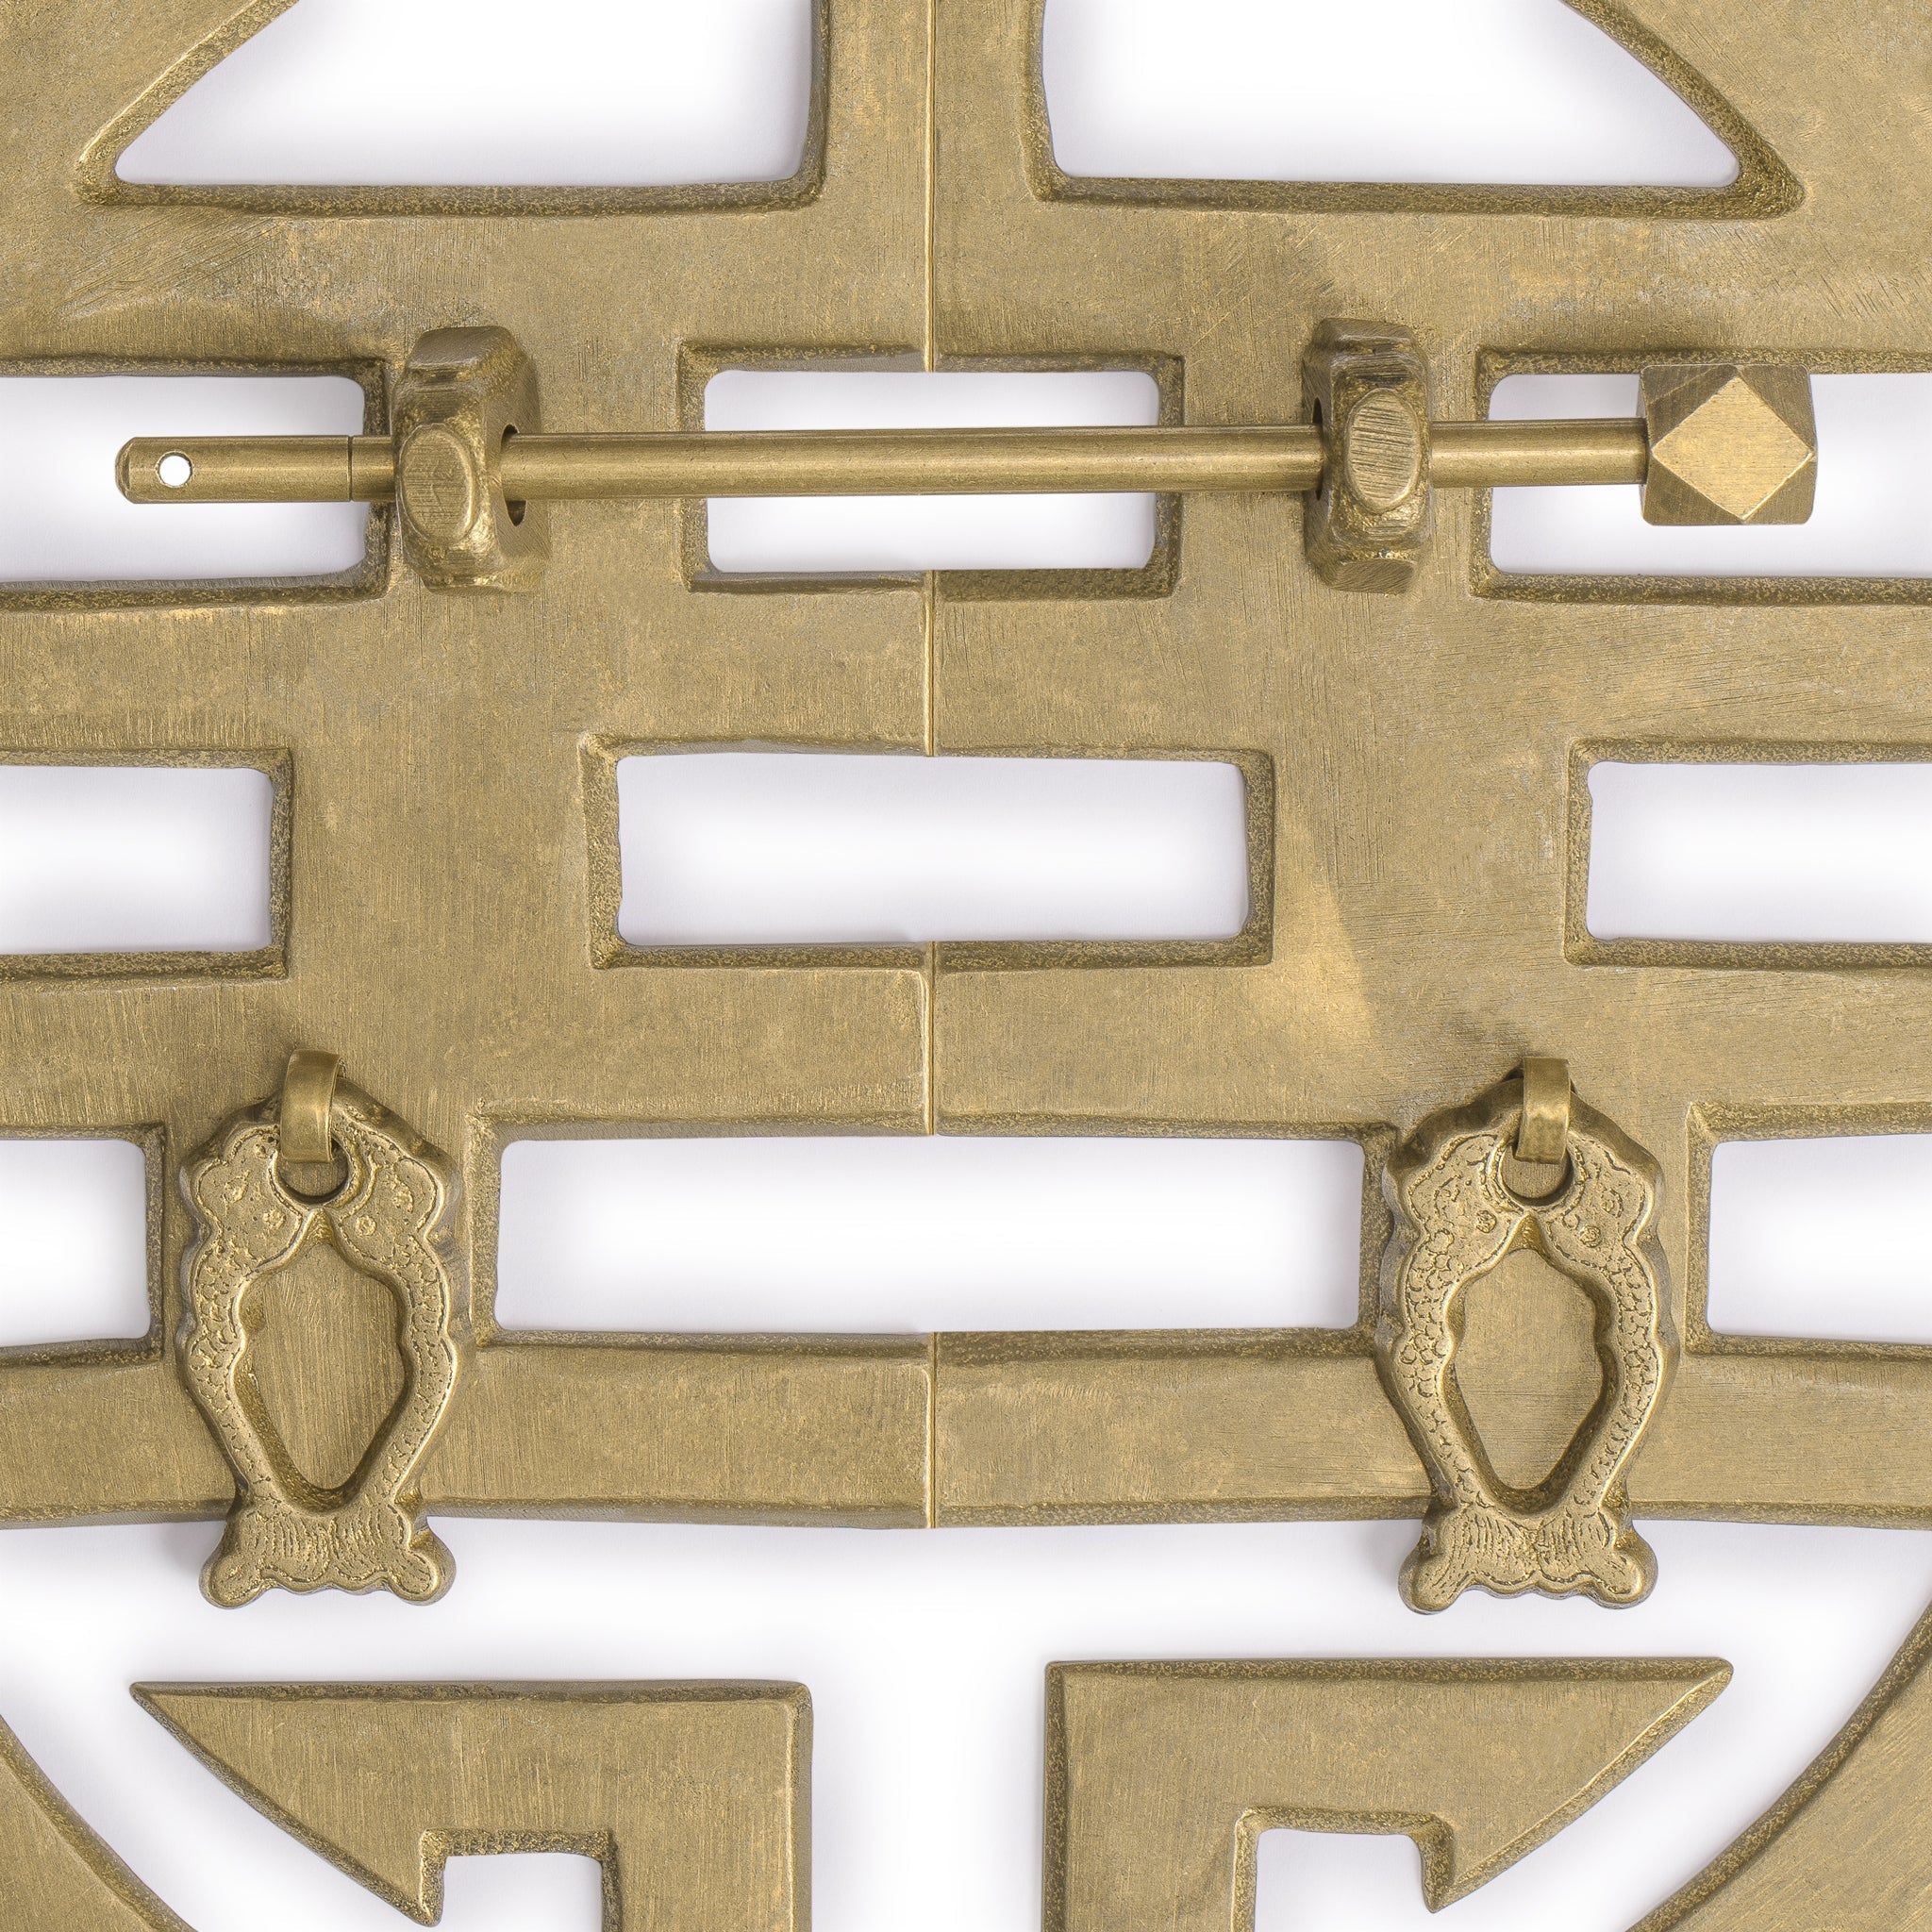 Happiness Character Cabinet Face Plate 9.6"-Chinese Brass Hardware